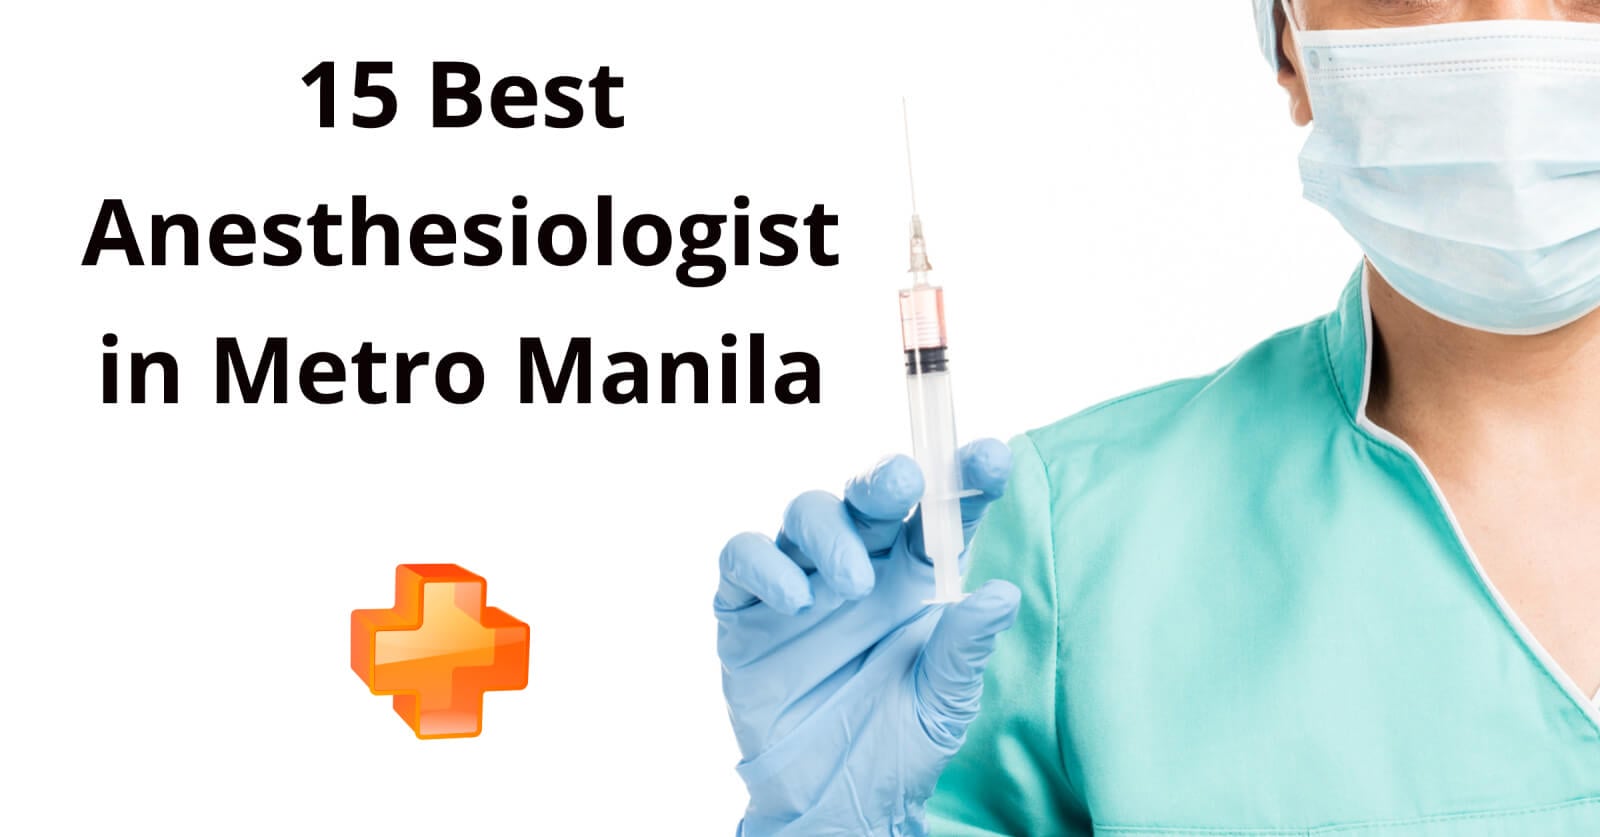 top rated anesthesiologists in metro manila.